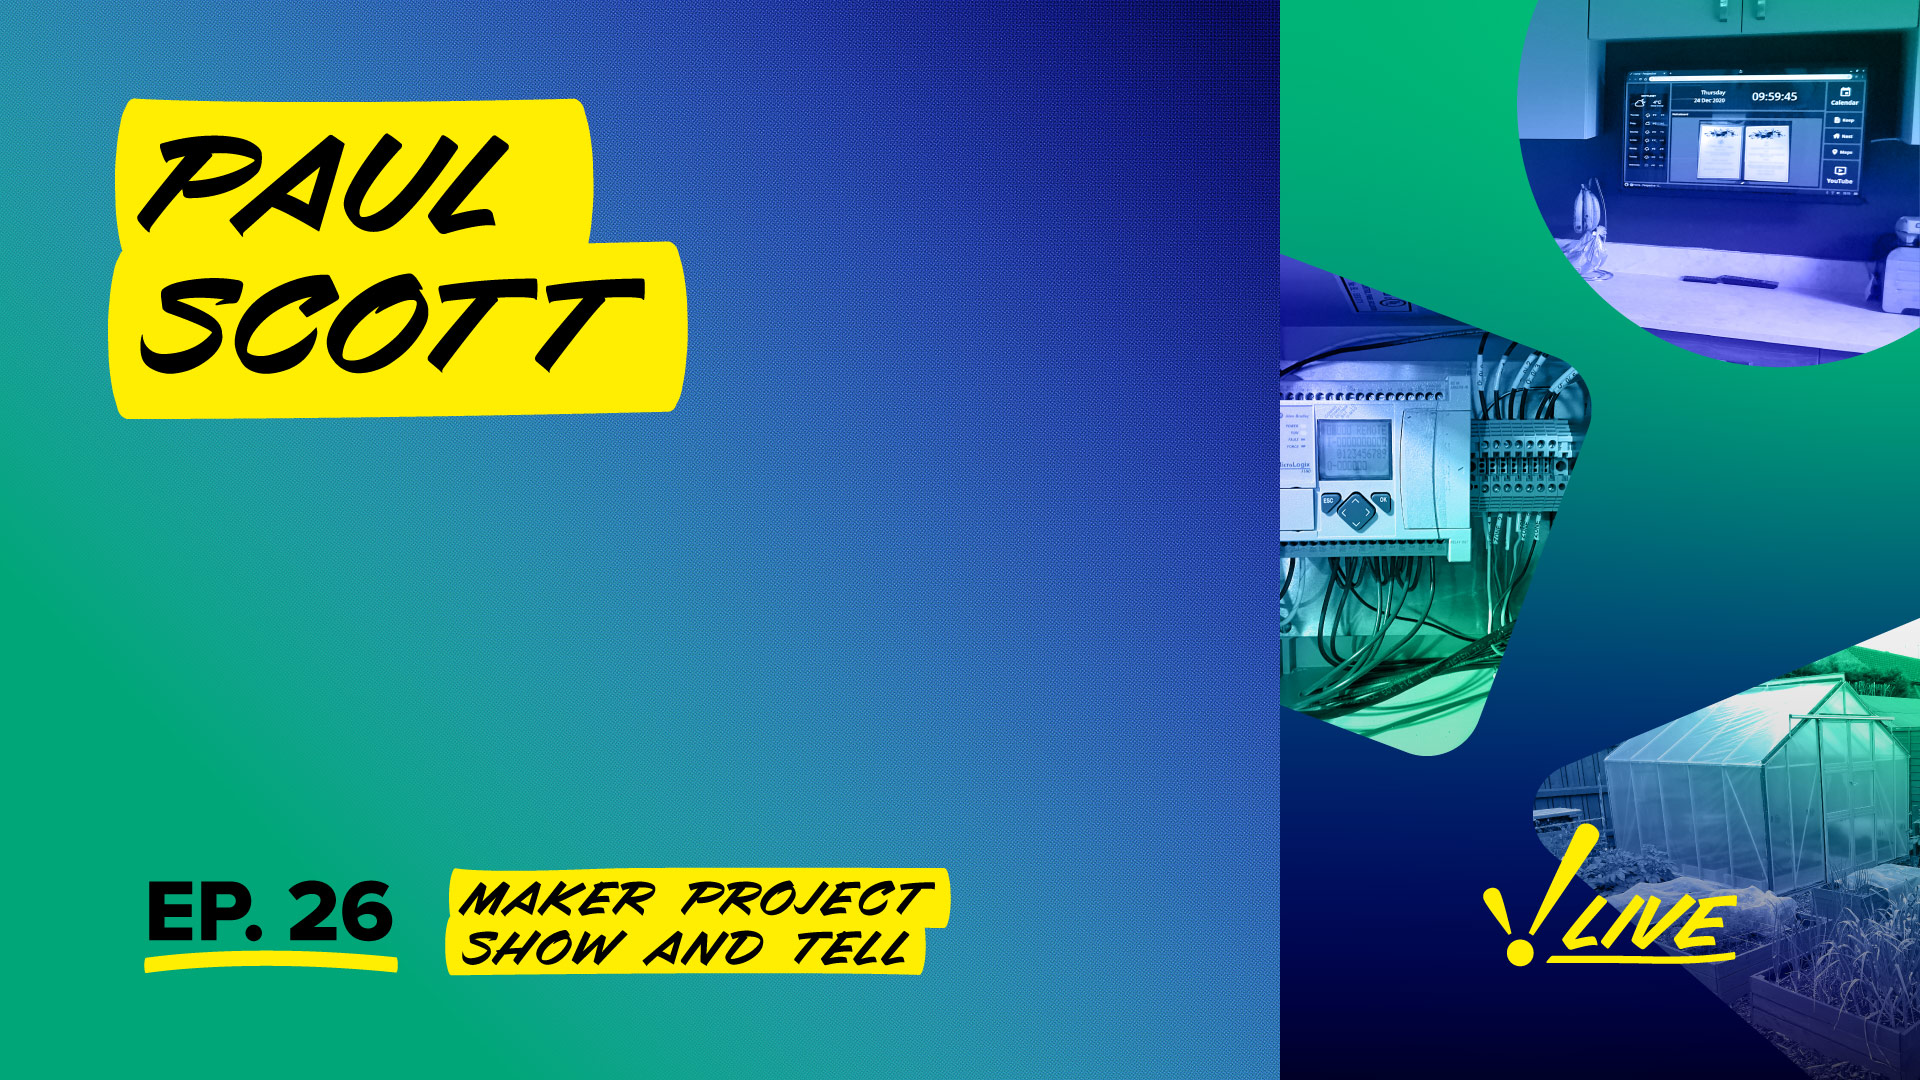 Maker Project Show & Tell